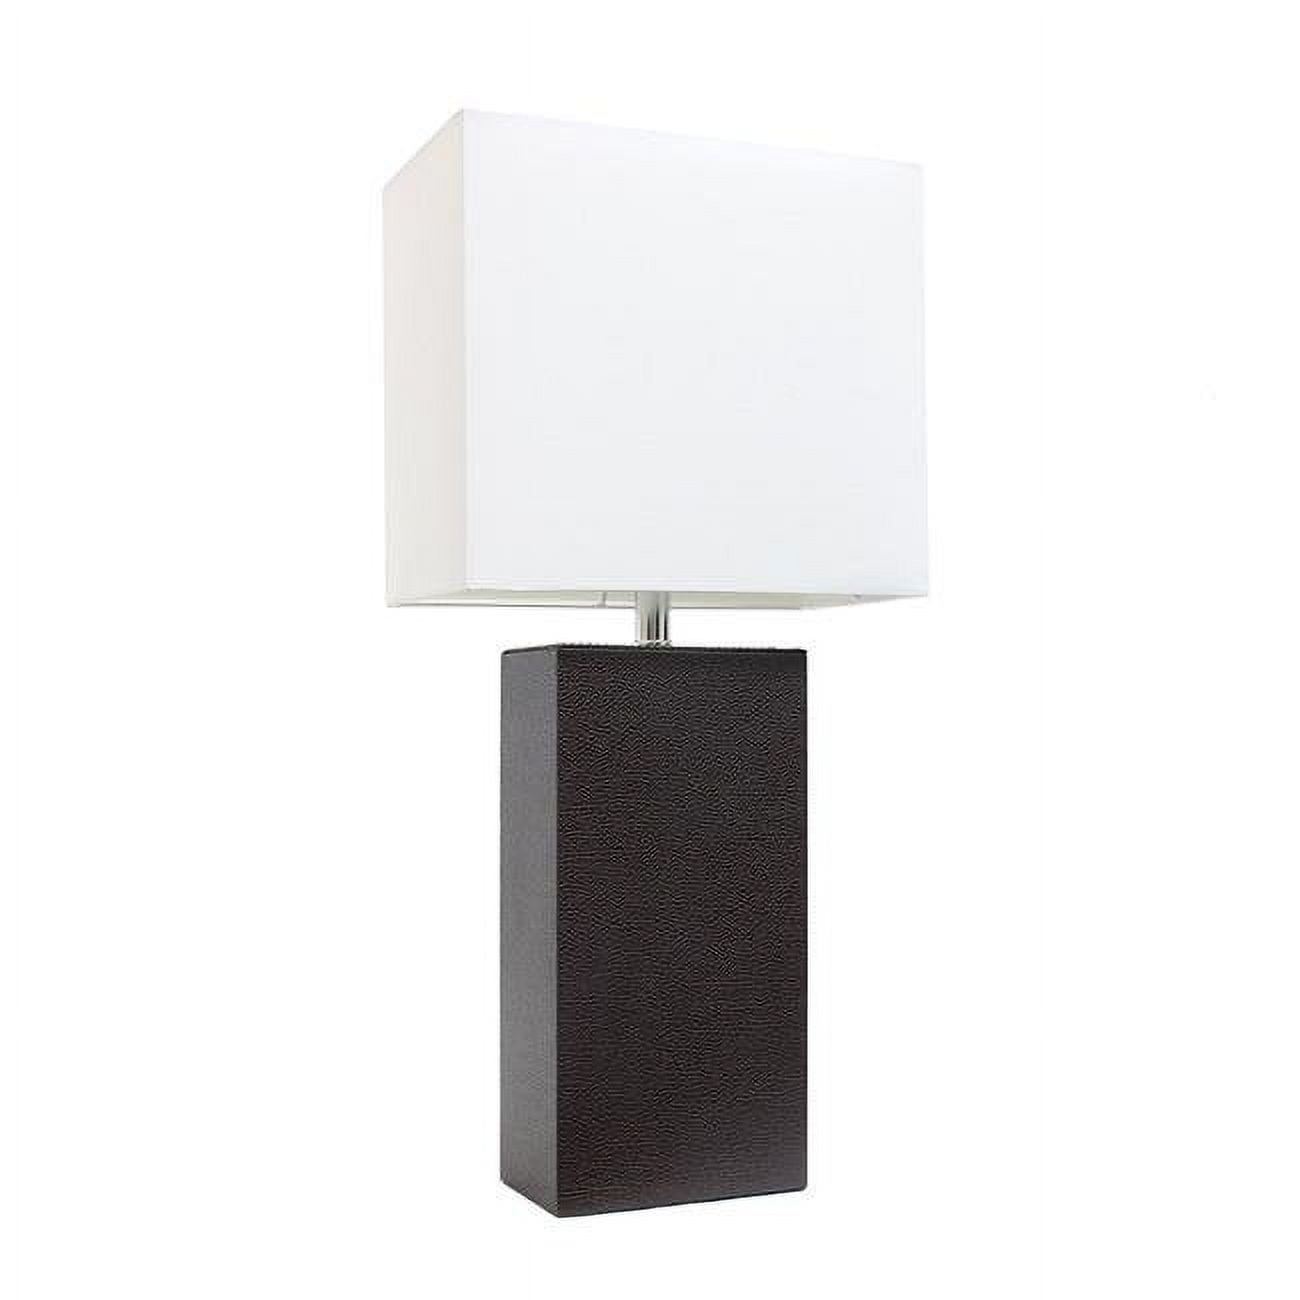 Alltherages Lt1025-bwn Modern Brown Leather Table Lamp